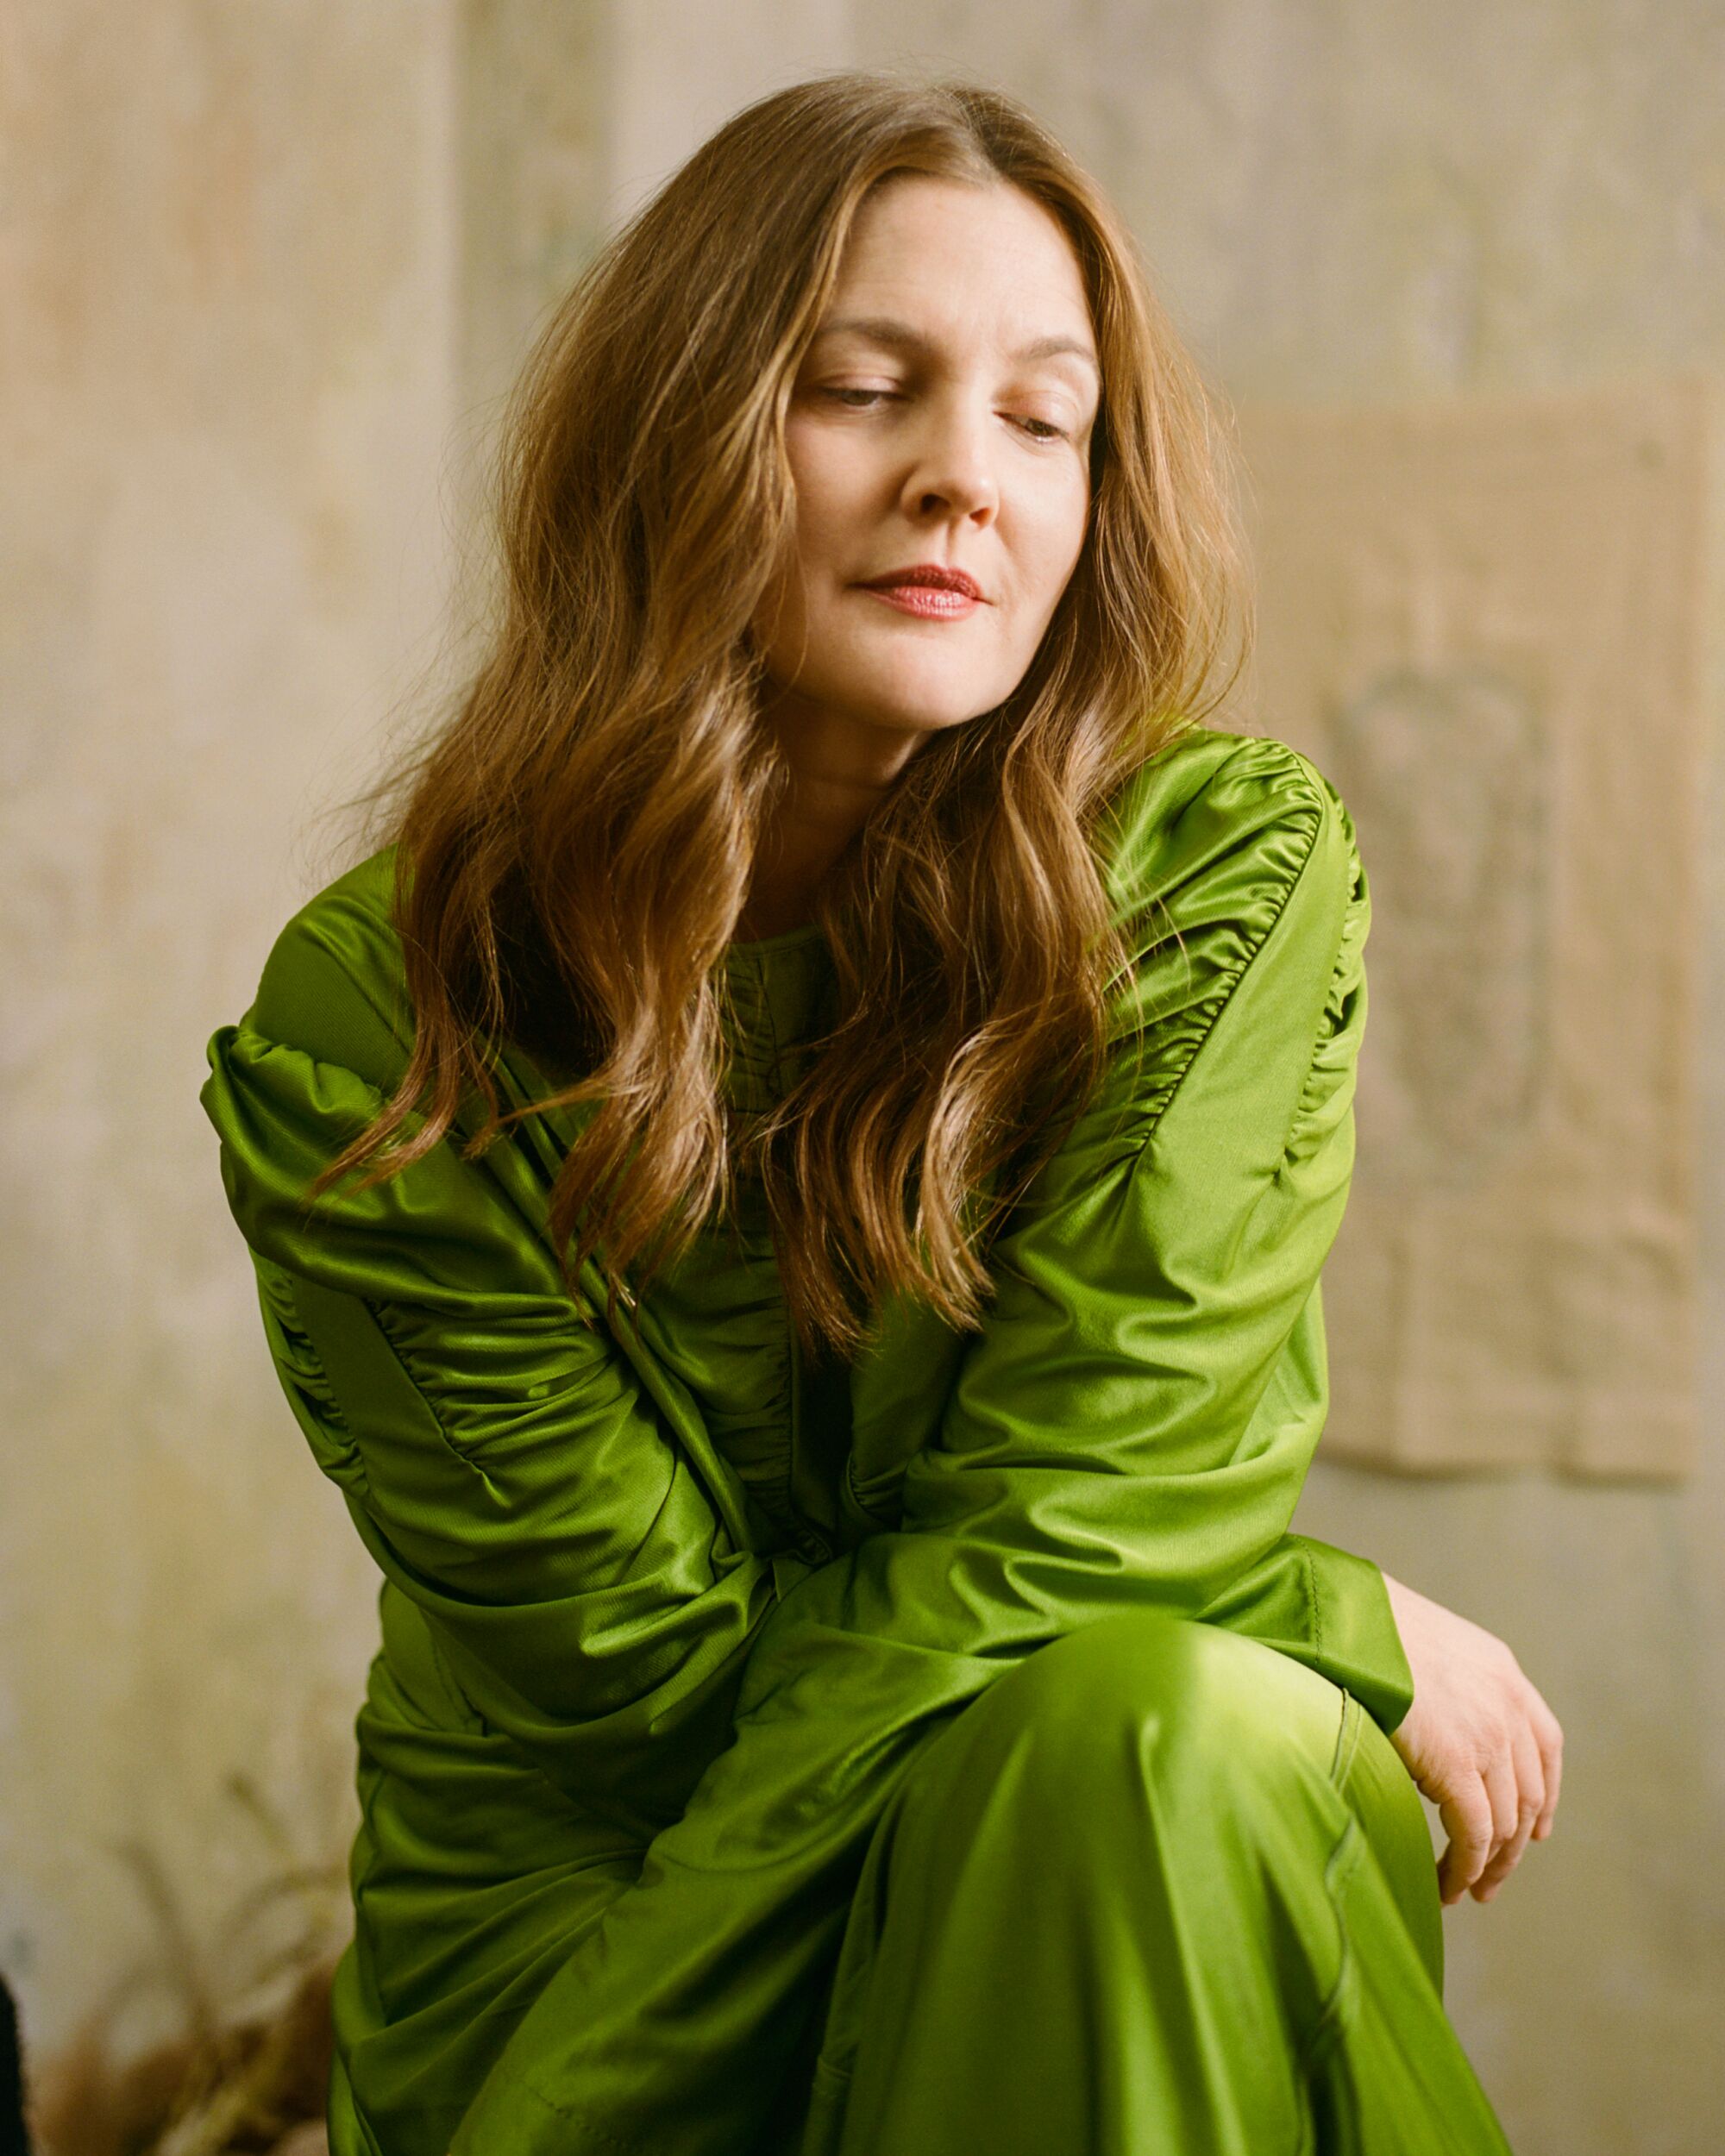 A seated Drew Barrymore, dressed in green, looks pensive.